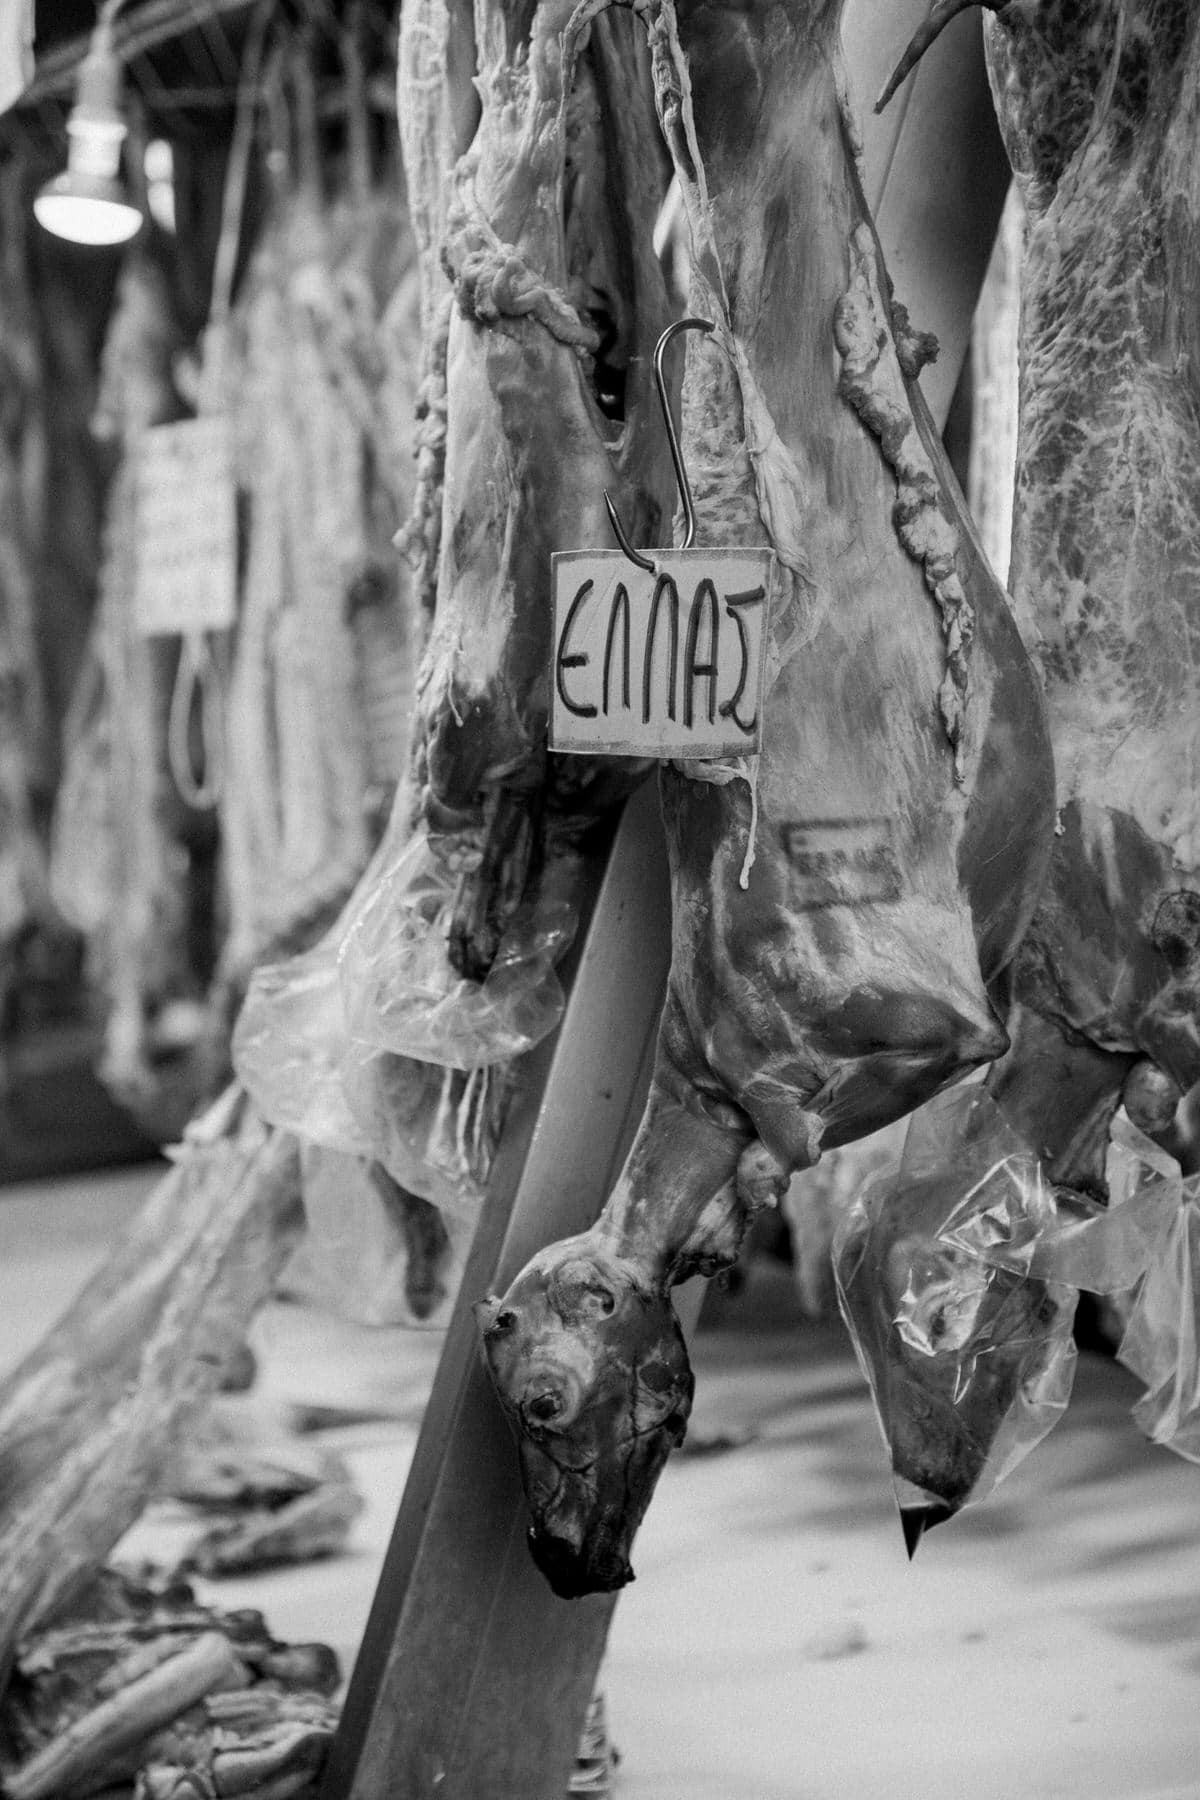 central-market-Athens-Greece-black-and-white-fine-art-photography-by-Studio-L-photographer-Laura-Schneider-_3040